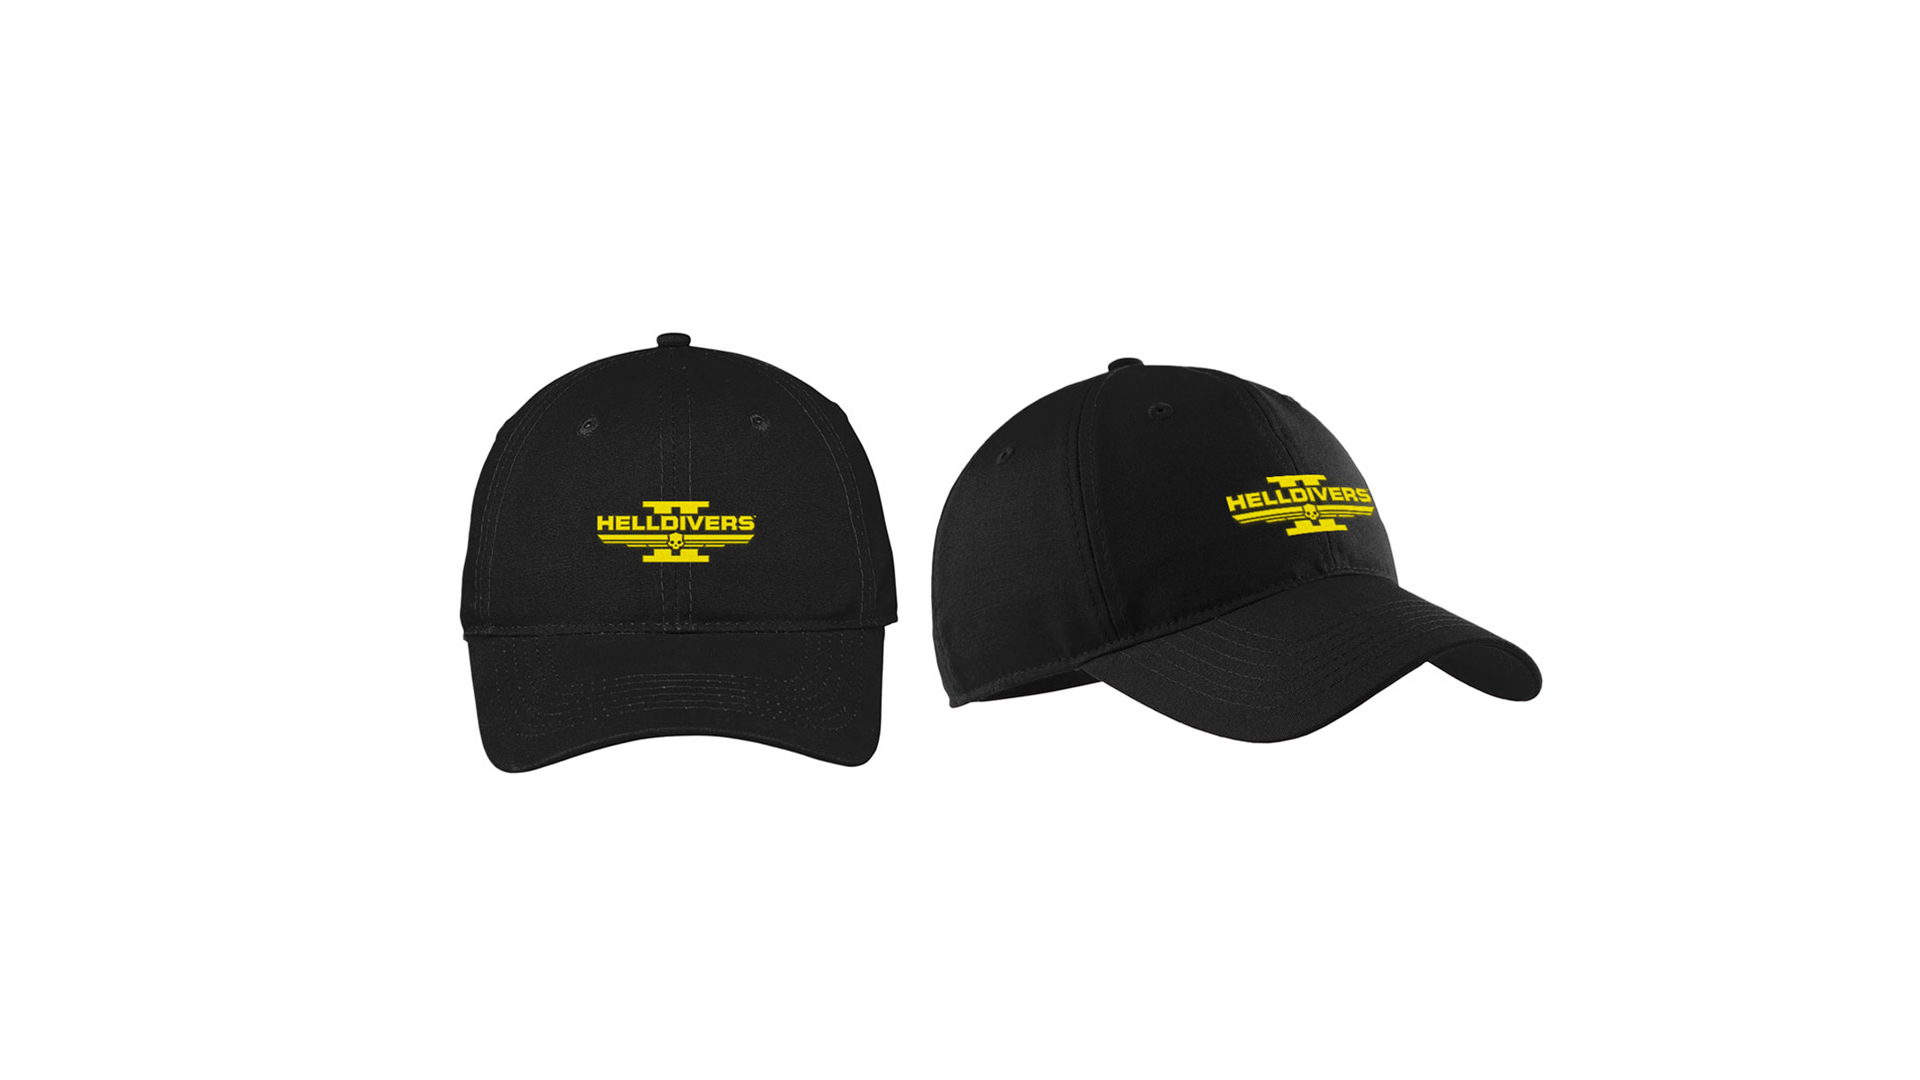  "A black baseball cap with the Helldivers 2 logo in yellow emblazoned on the front."